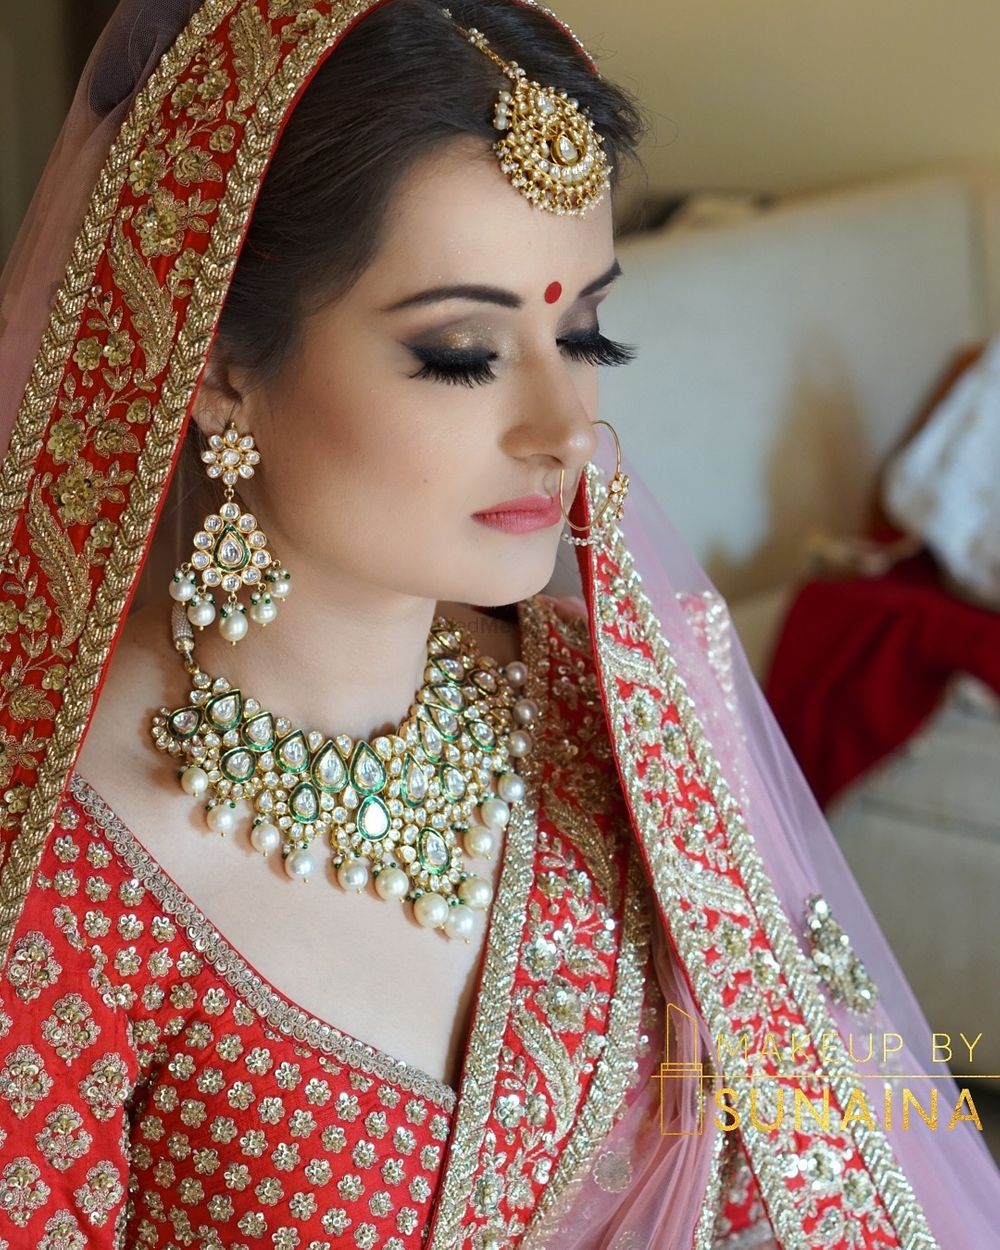 Photo of Bridal portrait in red with contrasting jewellery